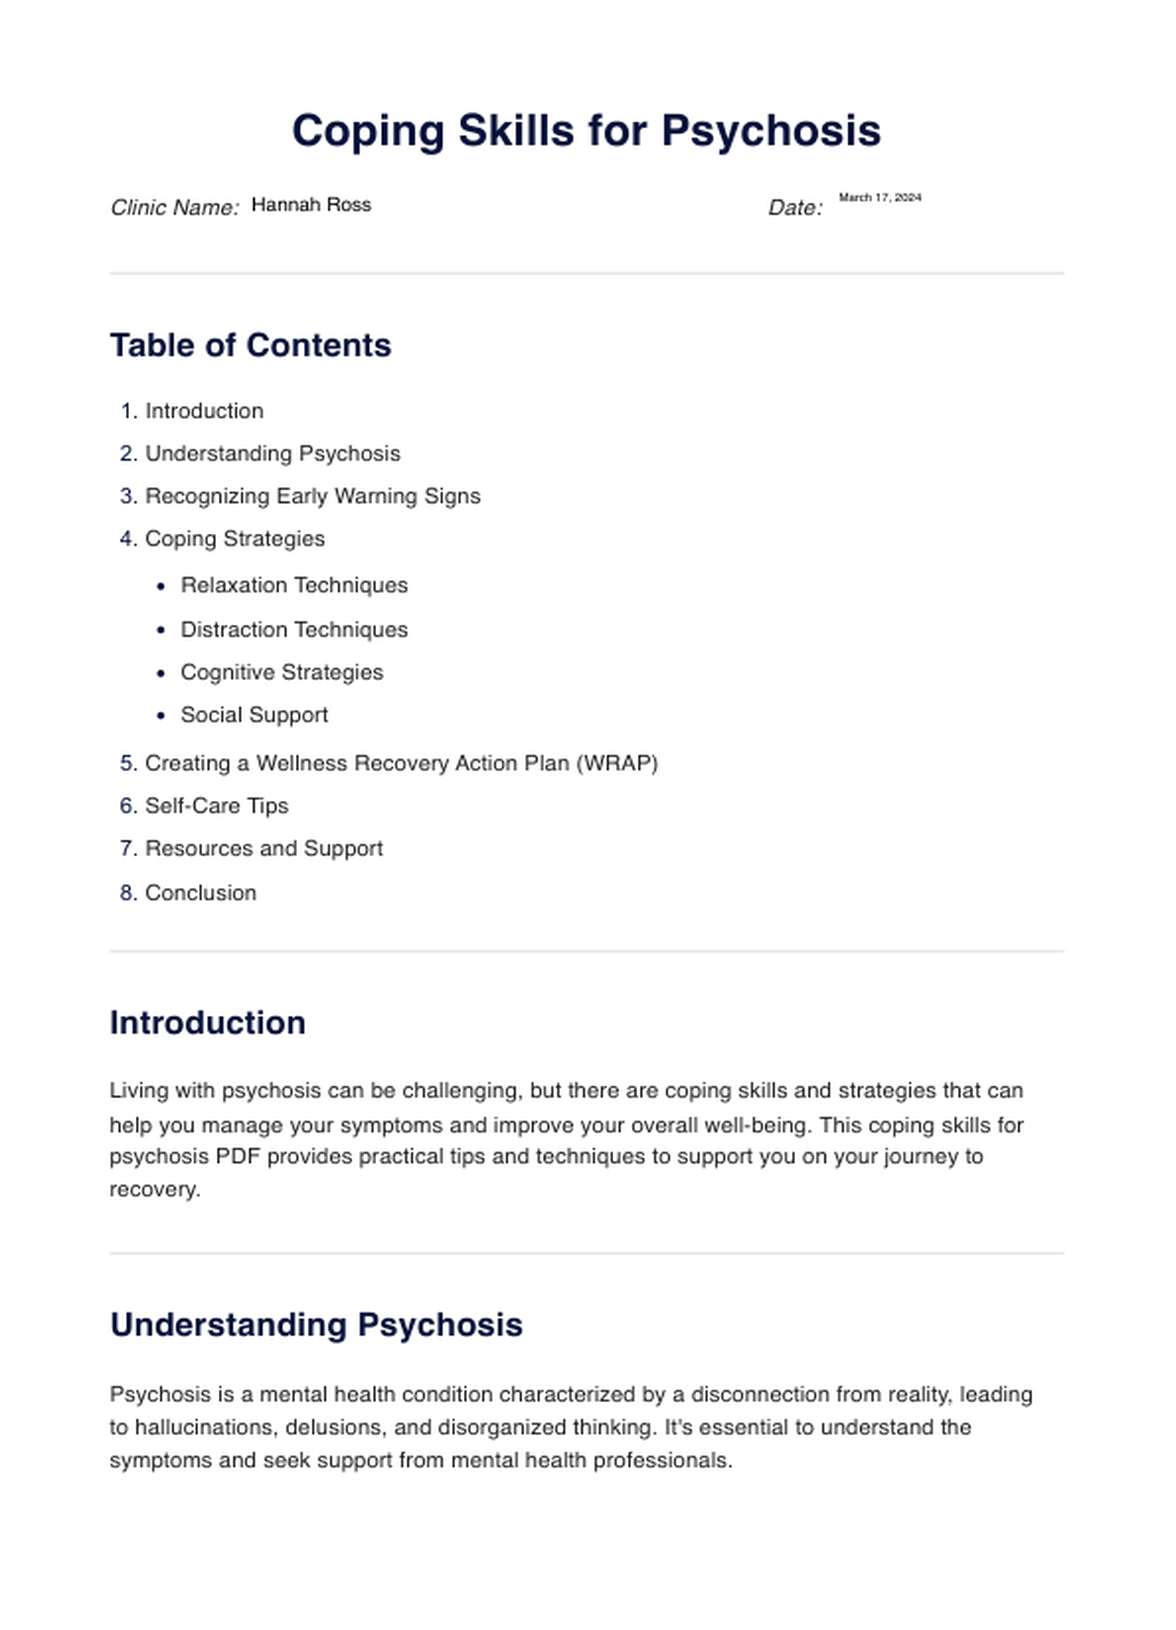 Coping Skills for Psychosis PDF PDF Example